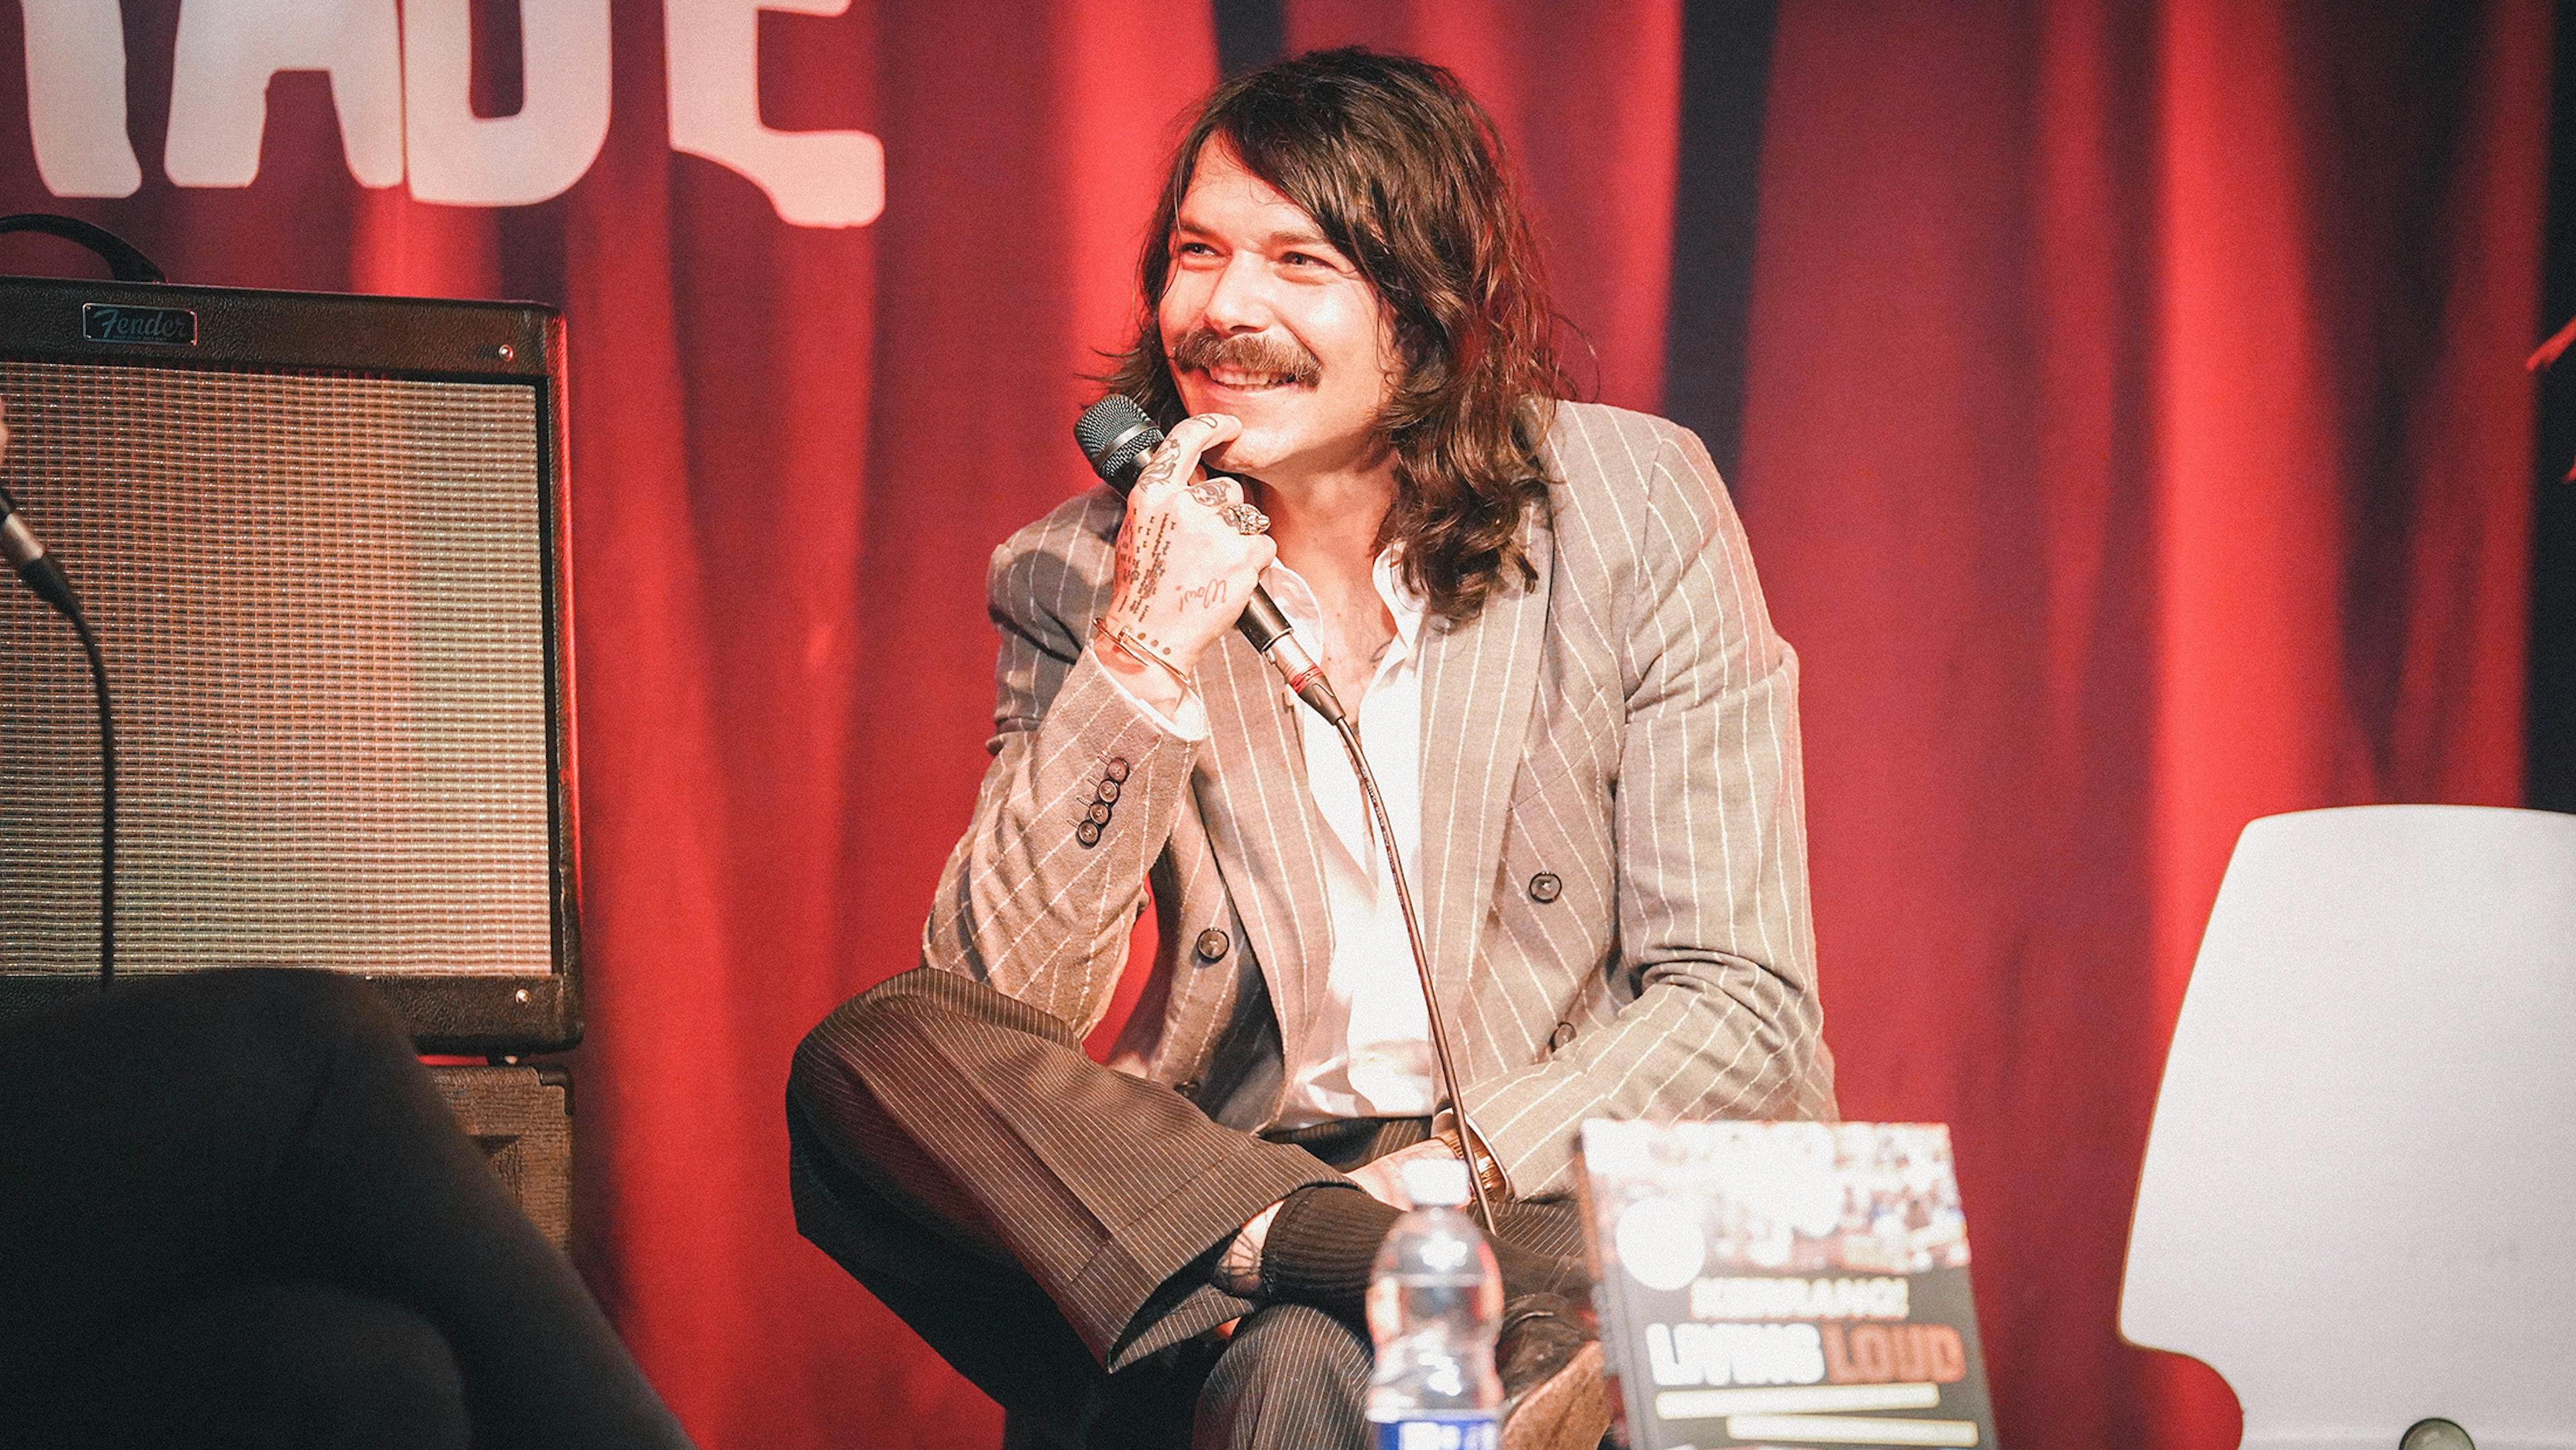 Inside Kerrang!’s book launch with Biffy Clyro, You Me At Six and Employed To Serve